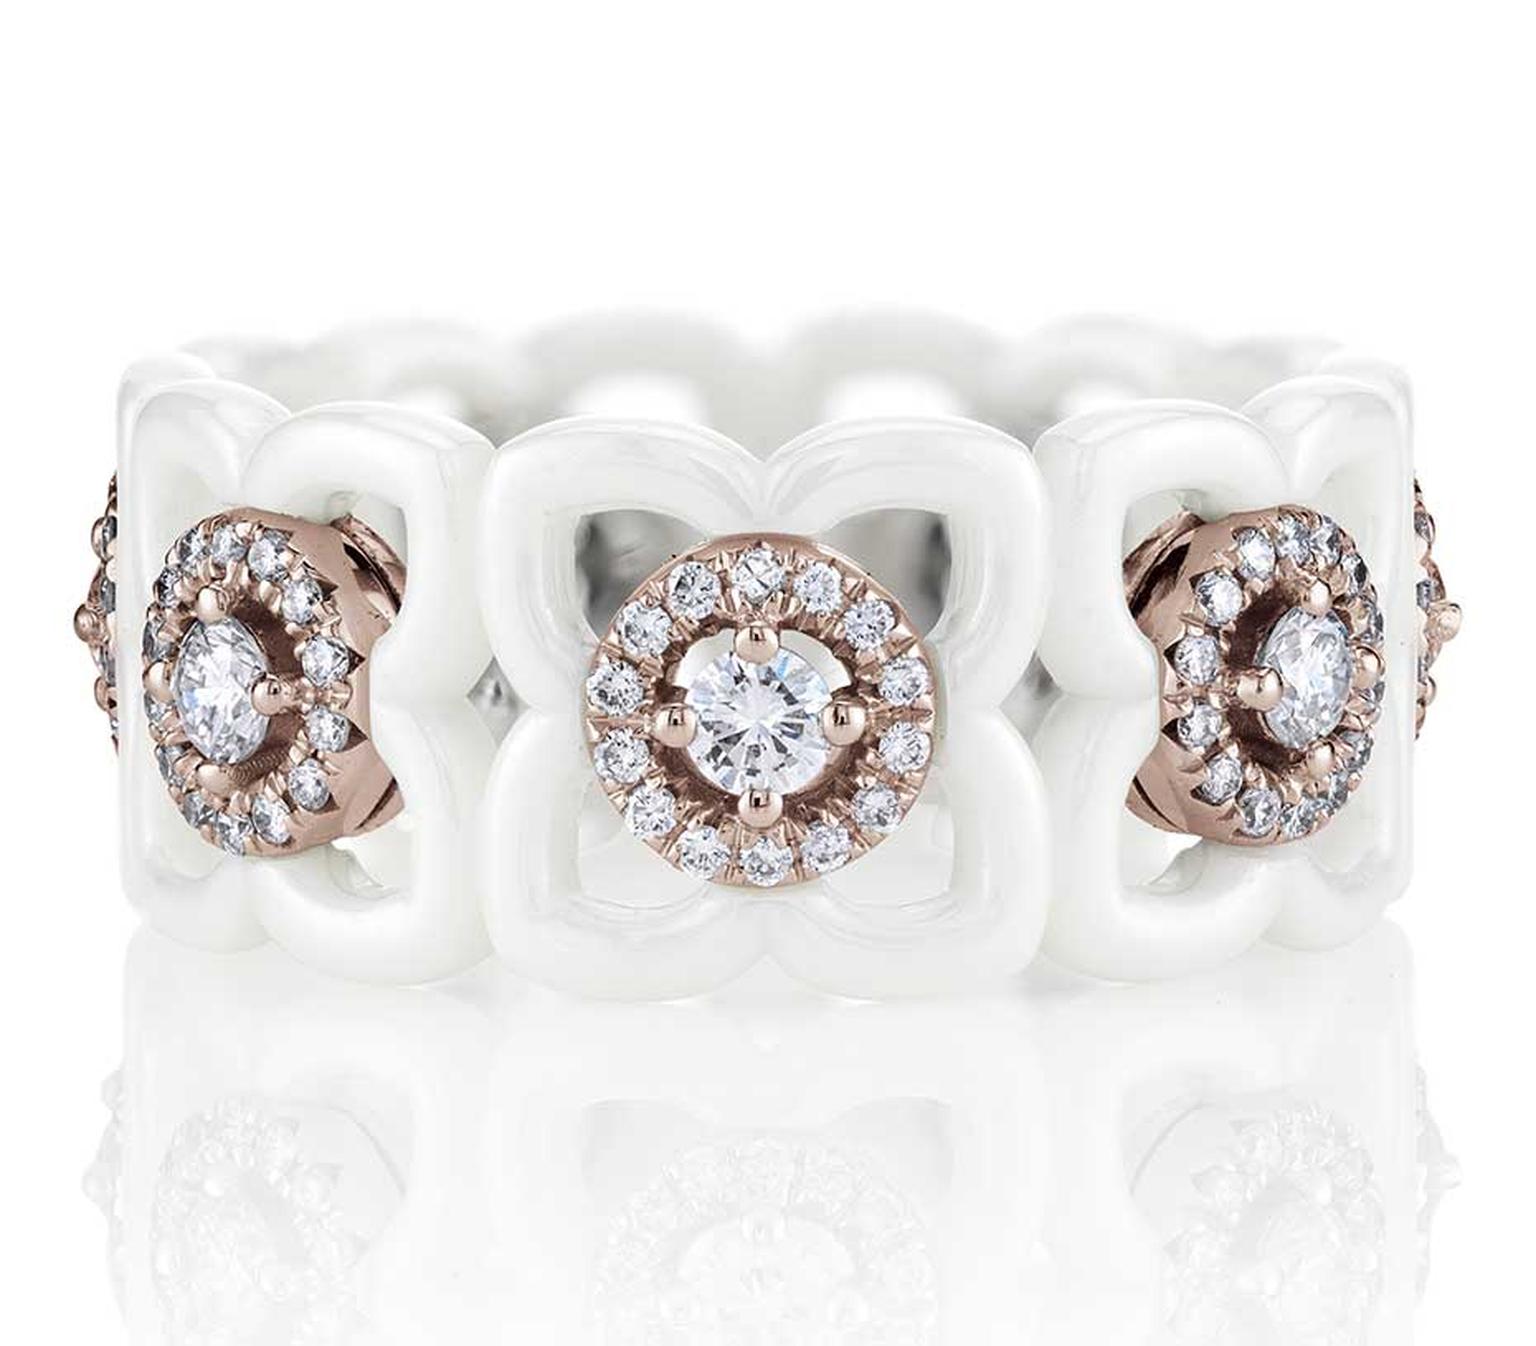 De Beers Daylight Enchanted Lotus ring in white ceramic, pink gold and diamonds (£3,225).